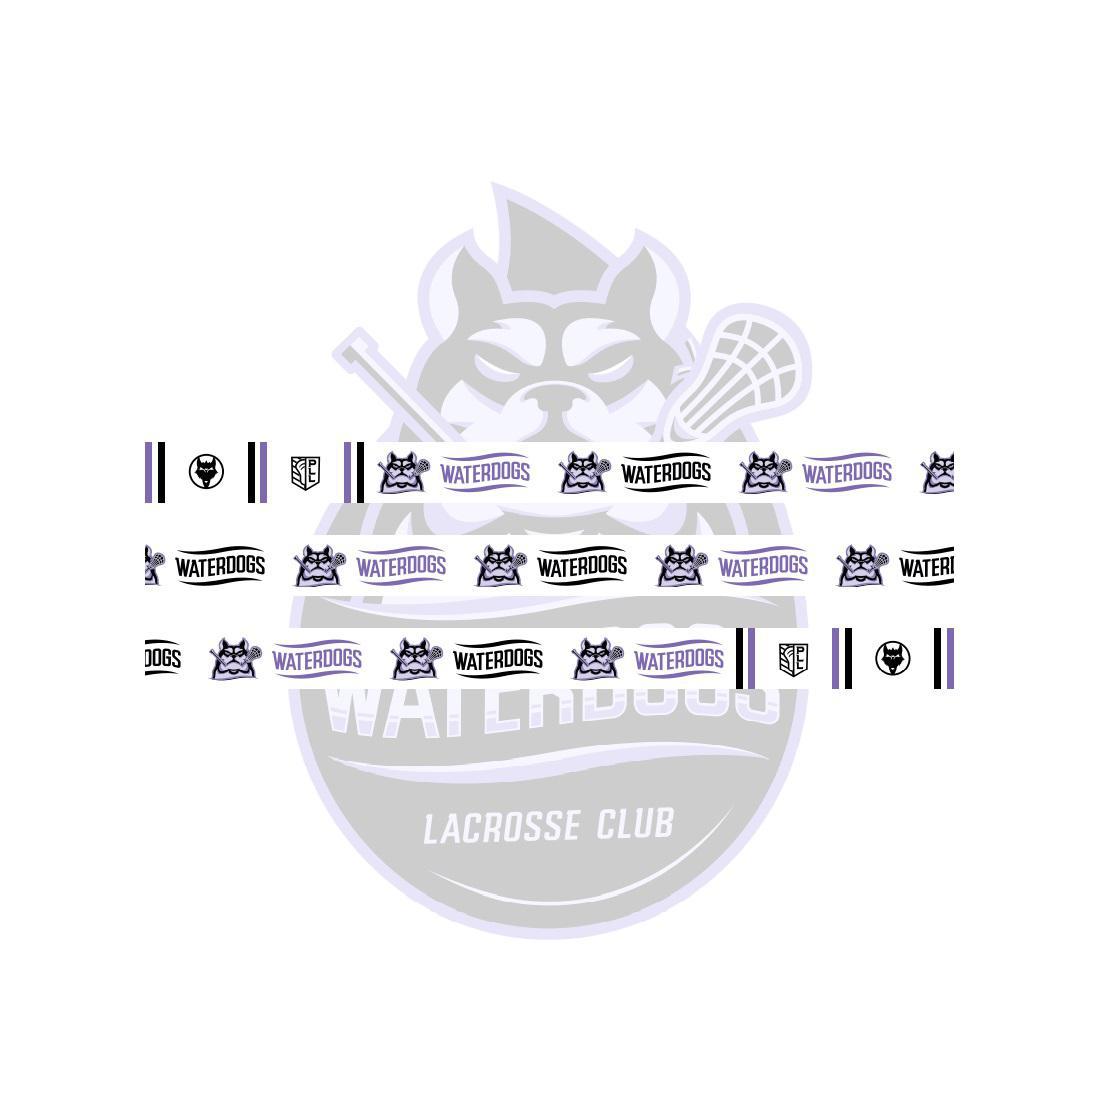 Official Lacrosse Grip Tape of the PLL- Waterdogs lacrosse, Lax grip tape for PLL